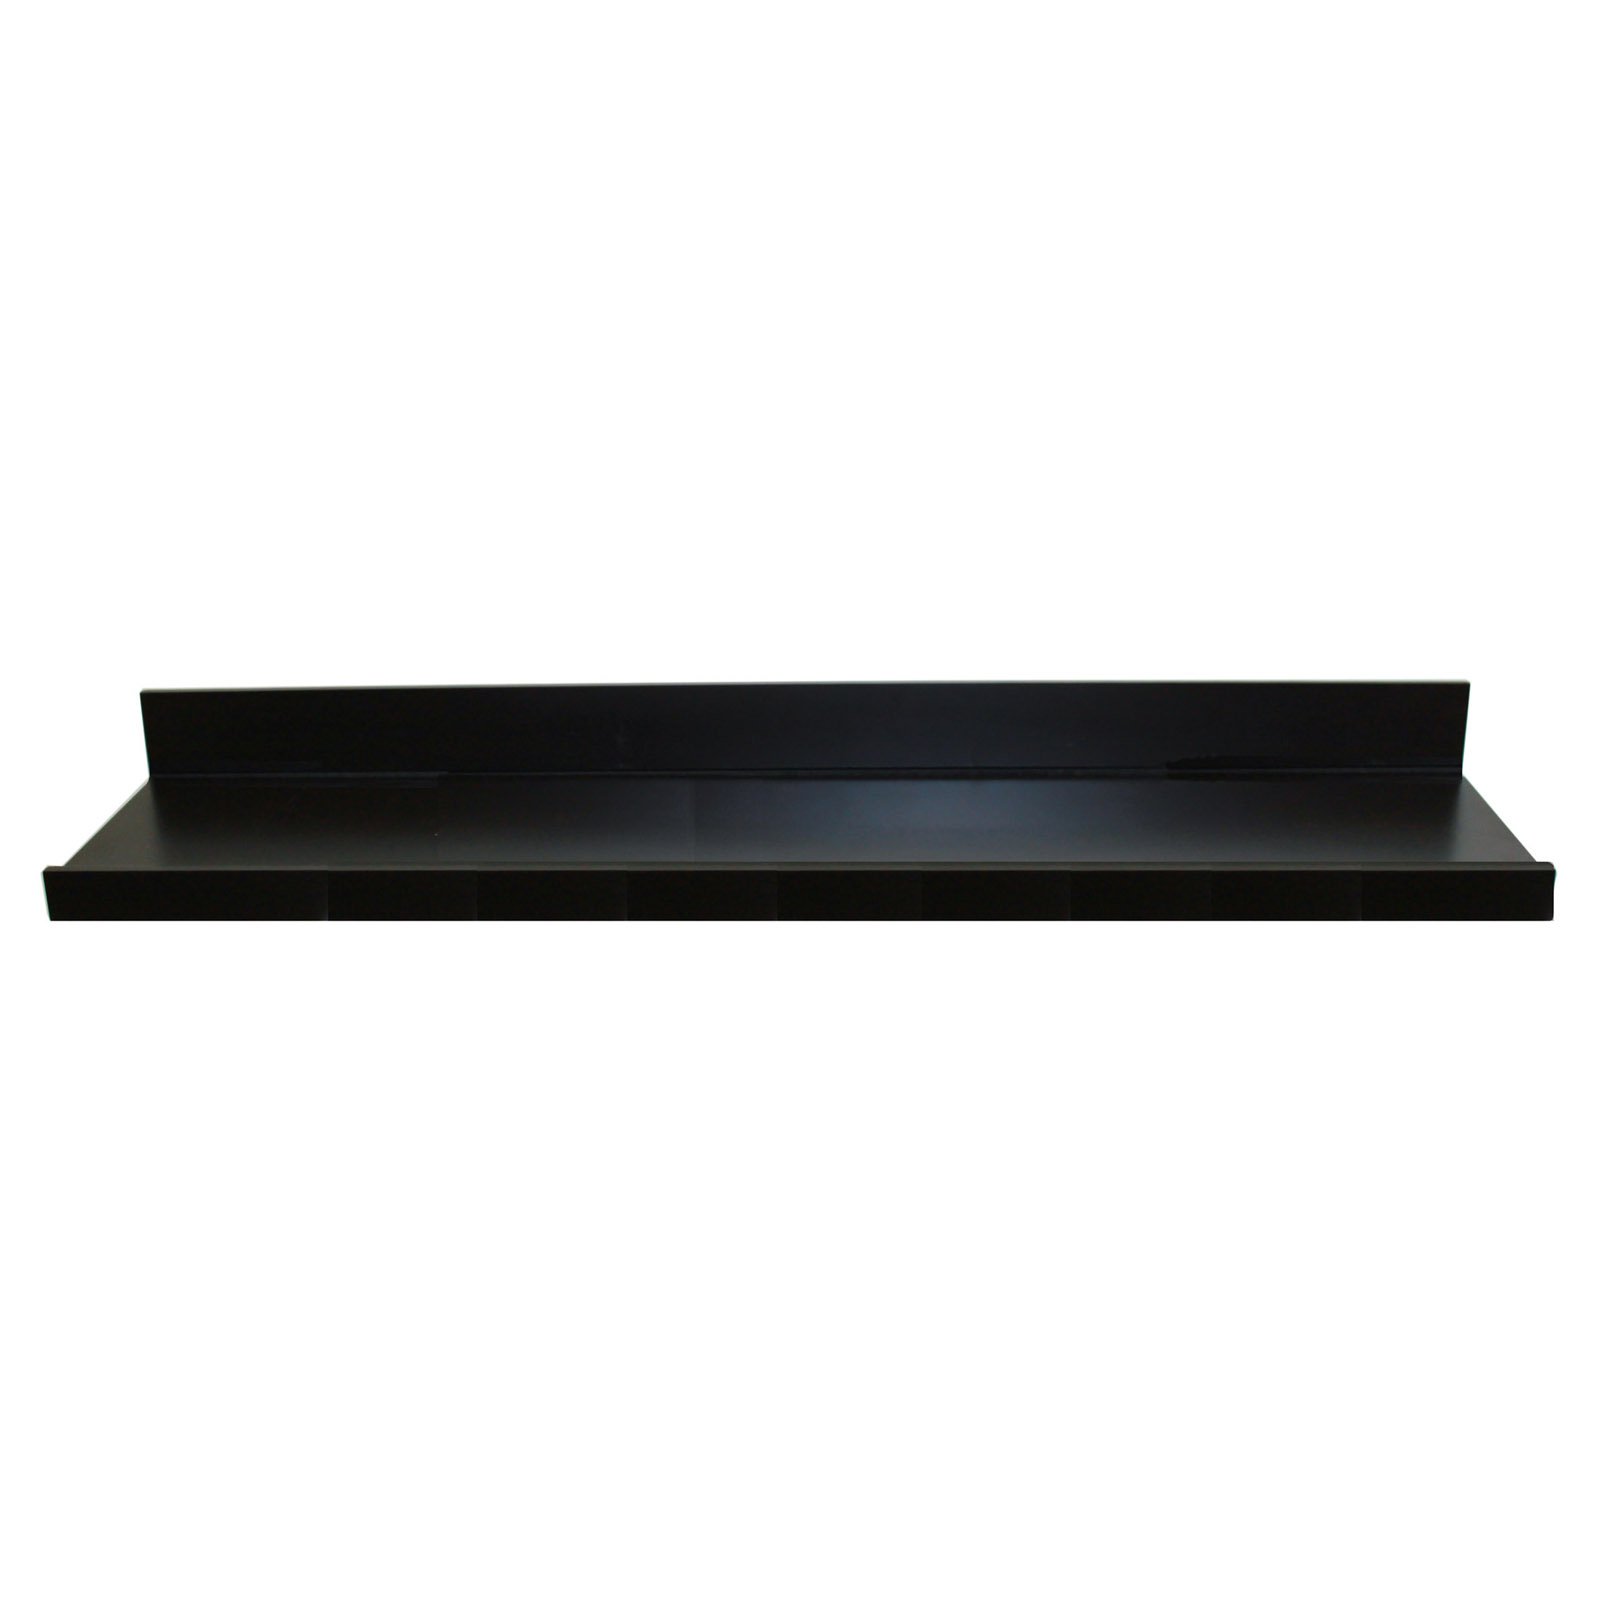 InPlace Shelves Rectangle Wood Wall Mounted Long Floating Picture Ledge Shelf, One, 72Wx4.5Dx3.5H, Black - image 1 of 2